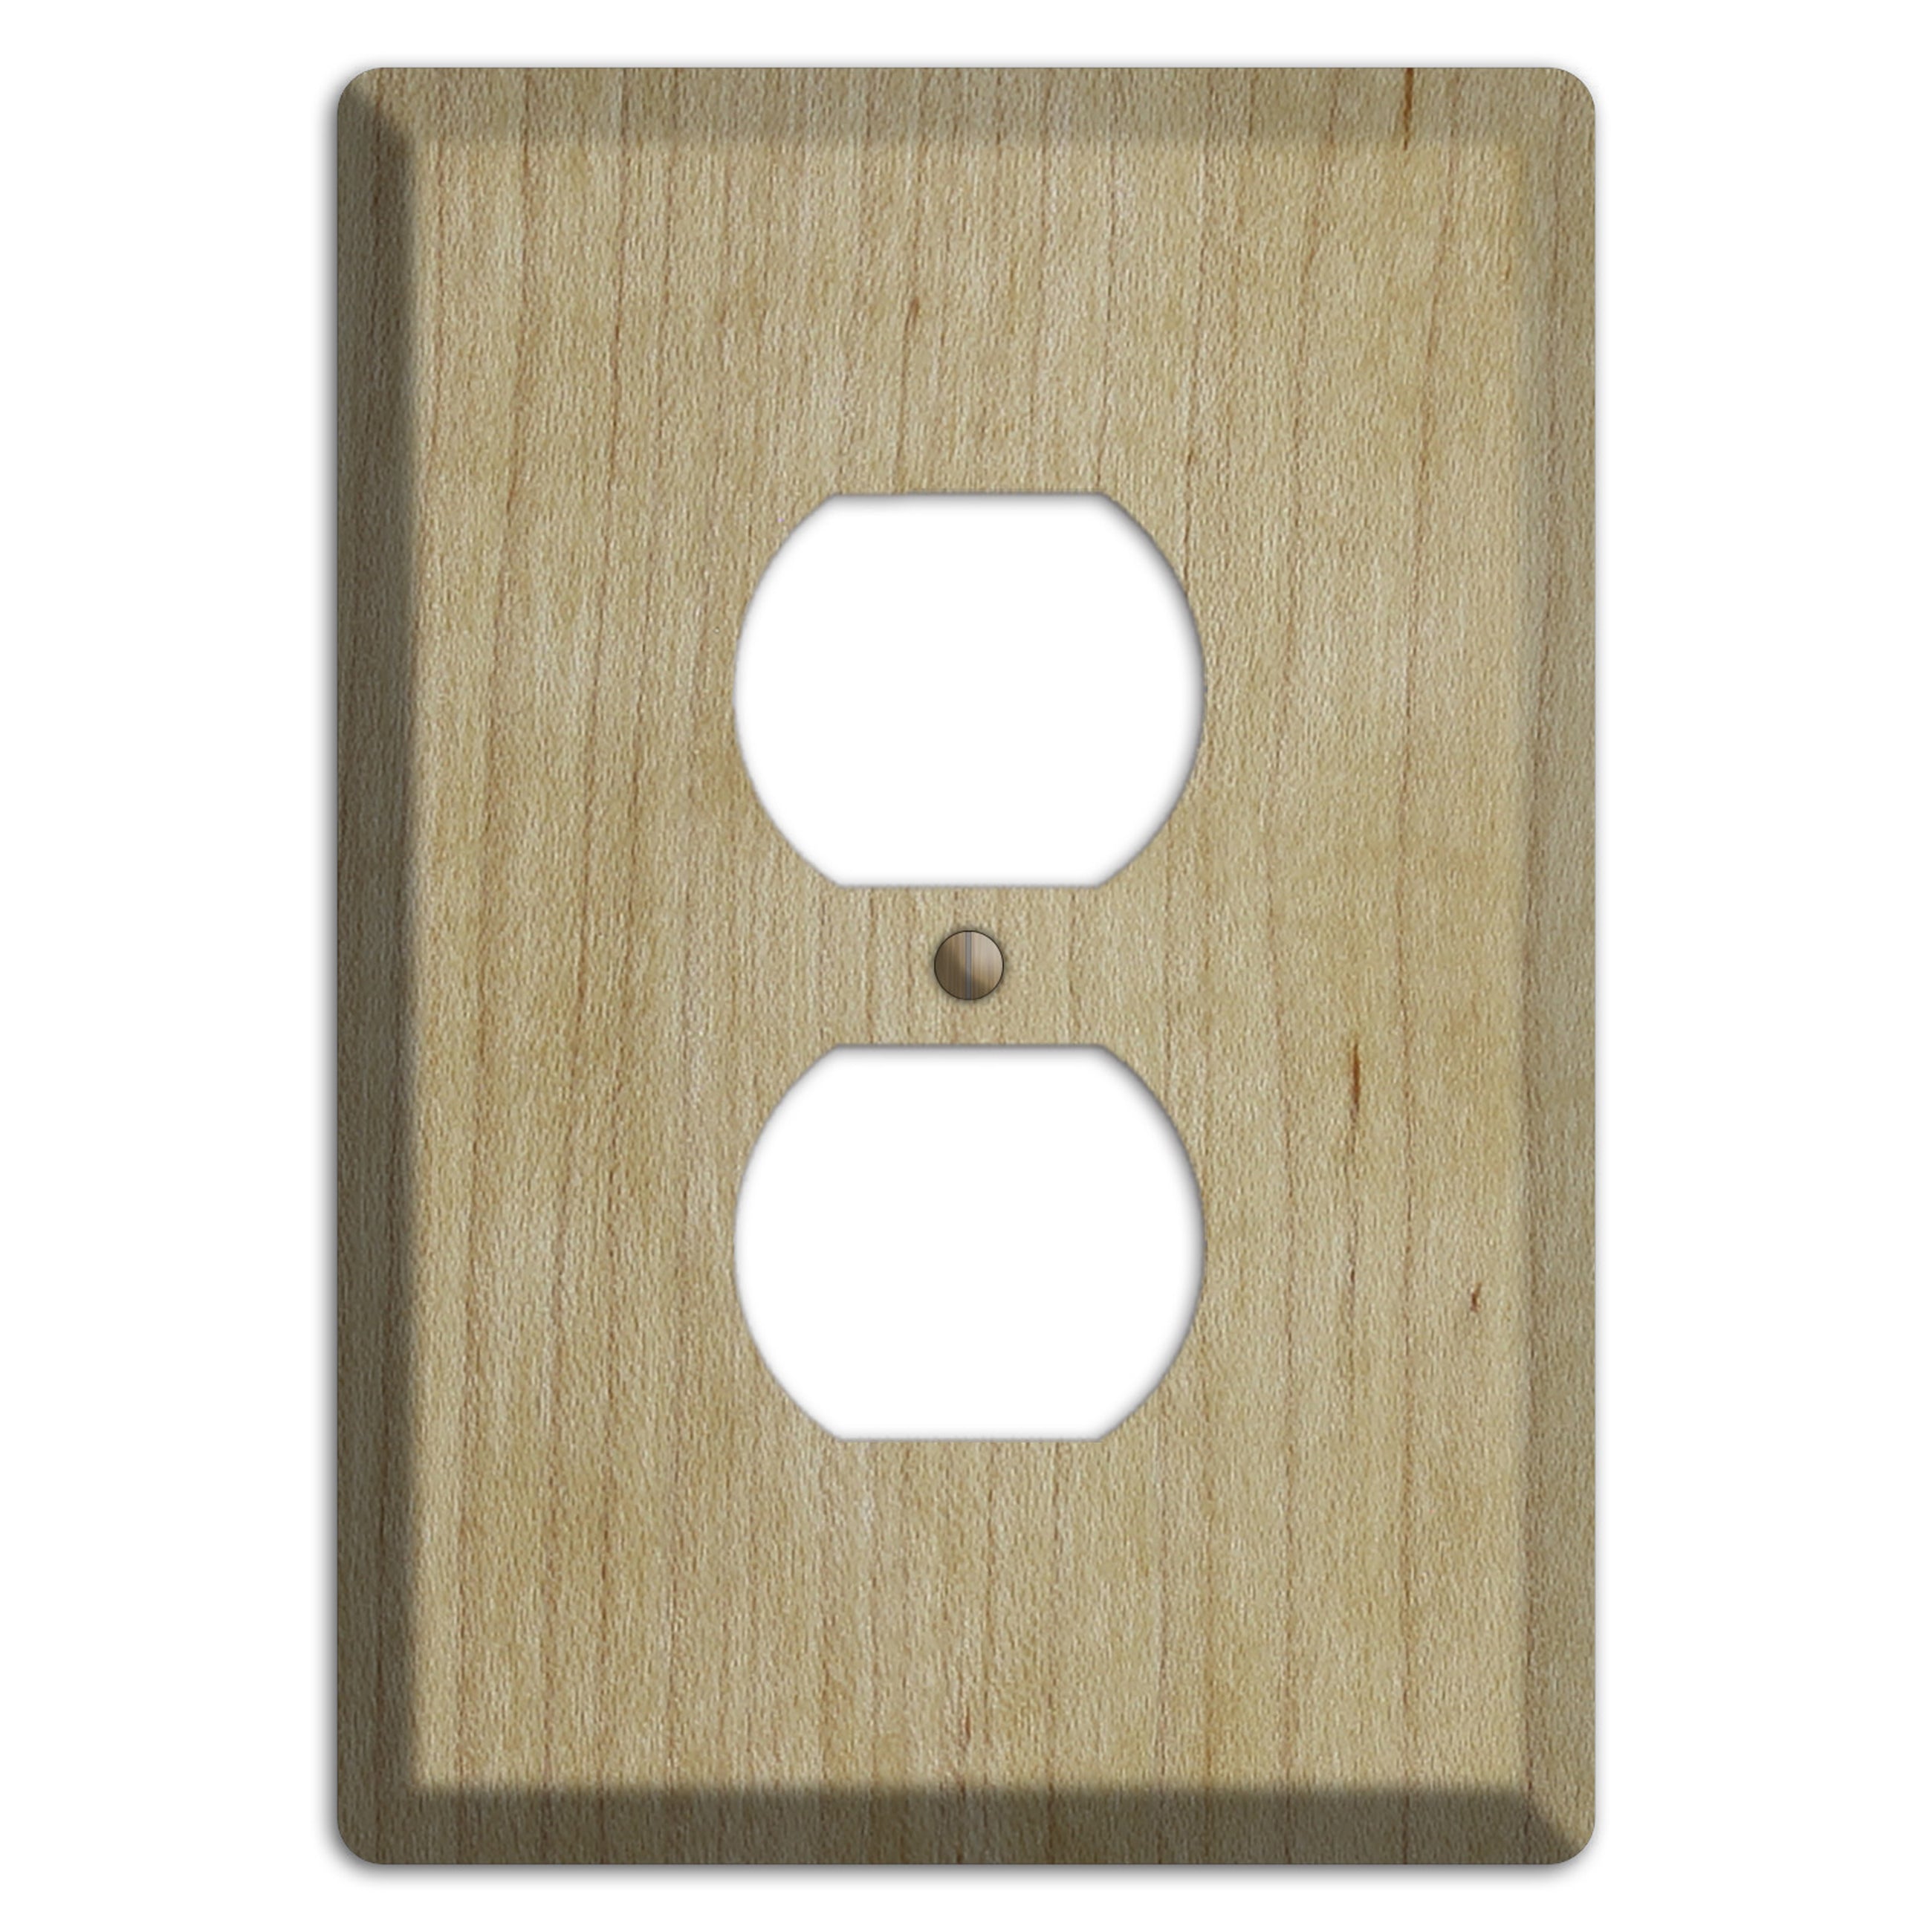 Maple Wood Wall Plate - 1 Gang GFCI Outlet Cover